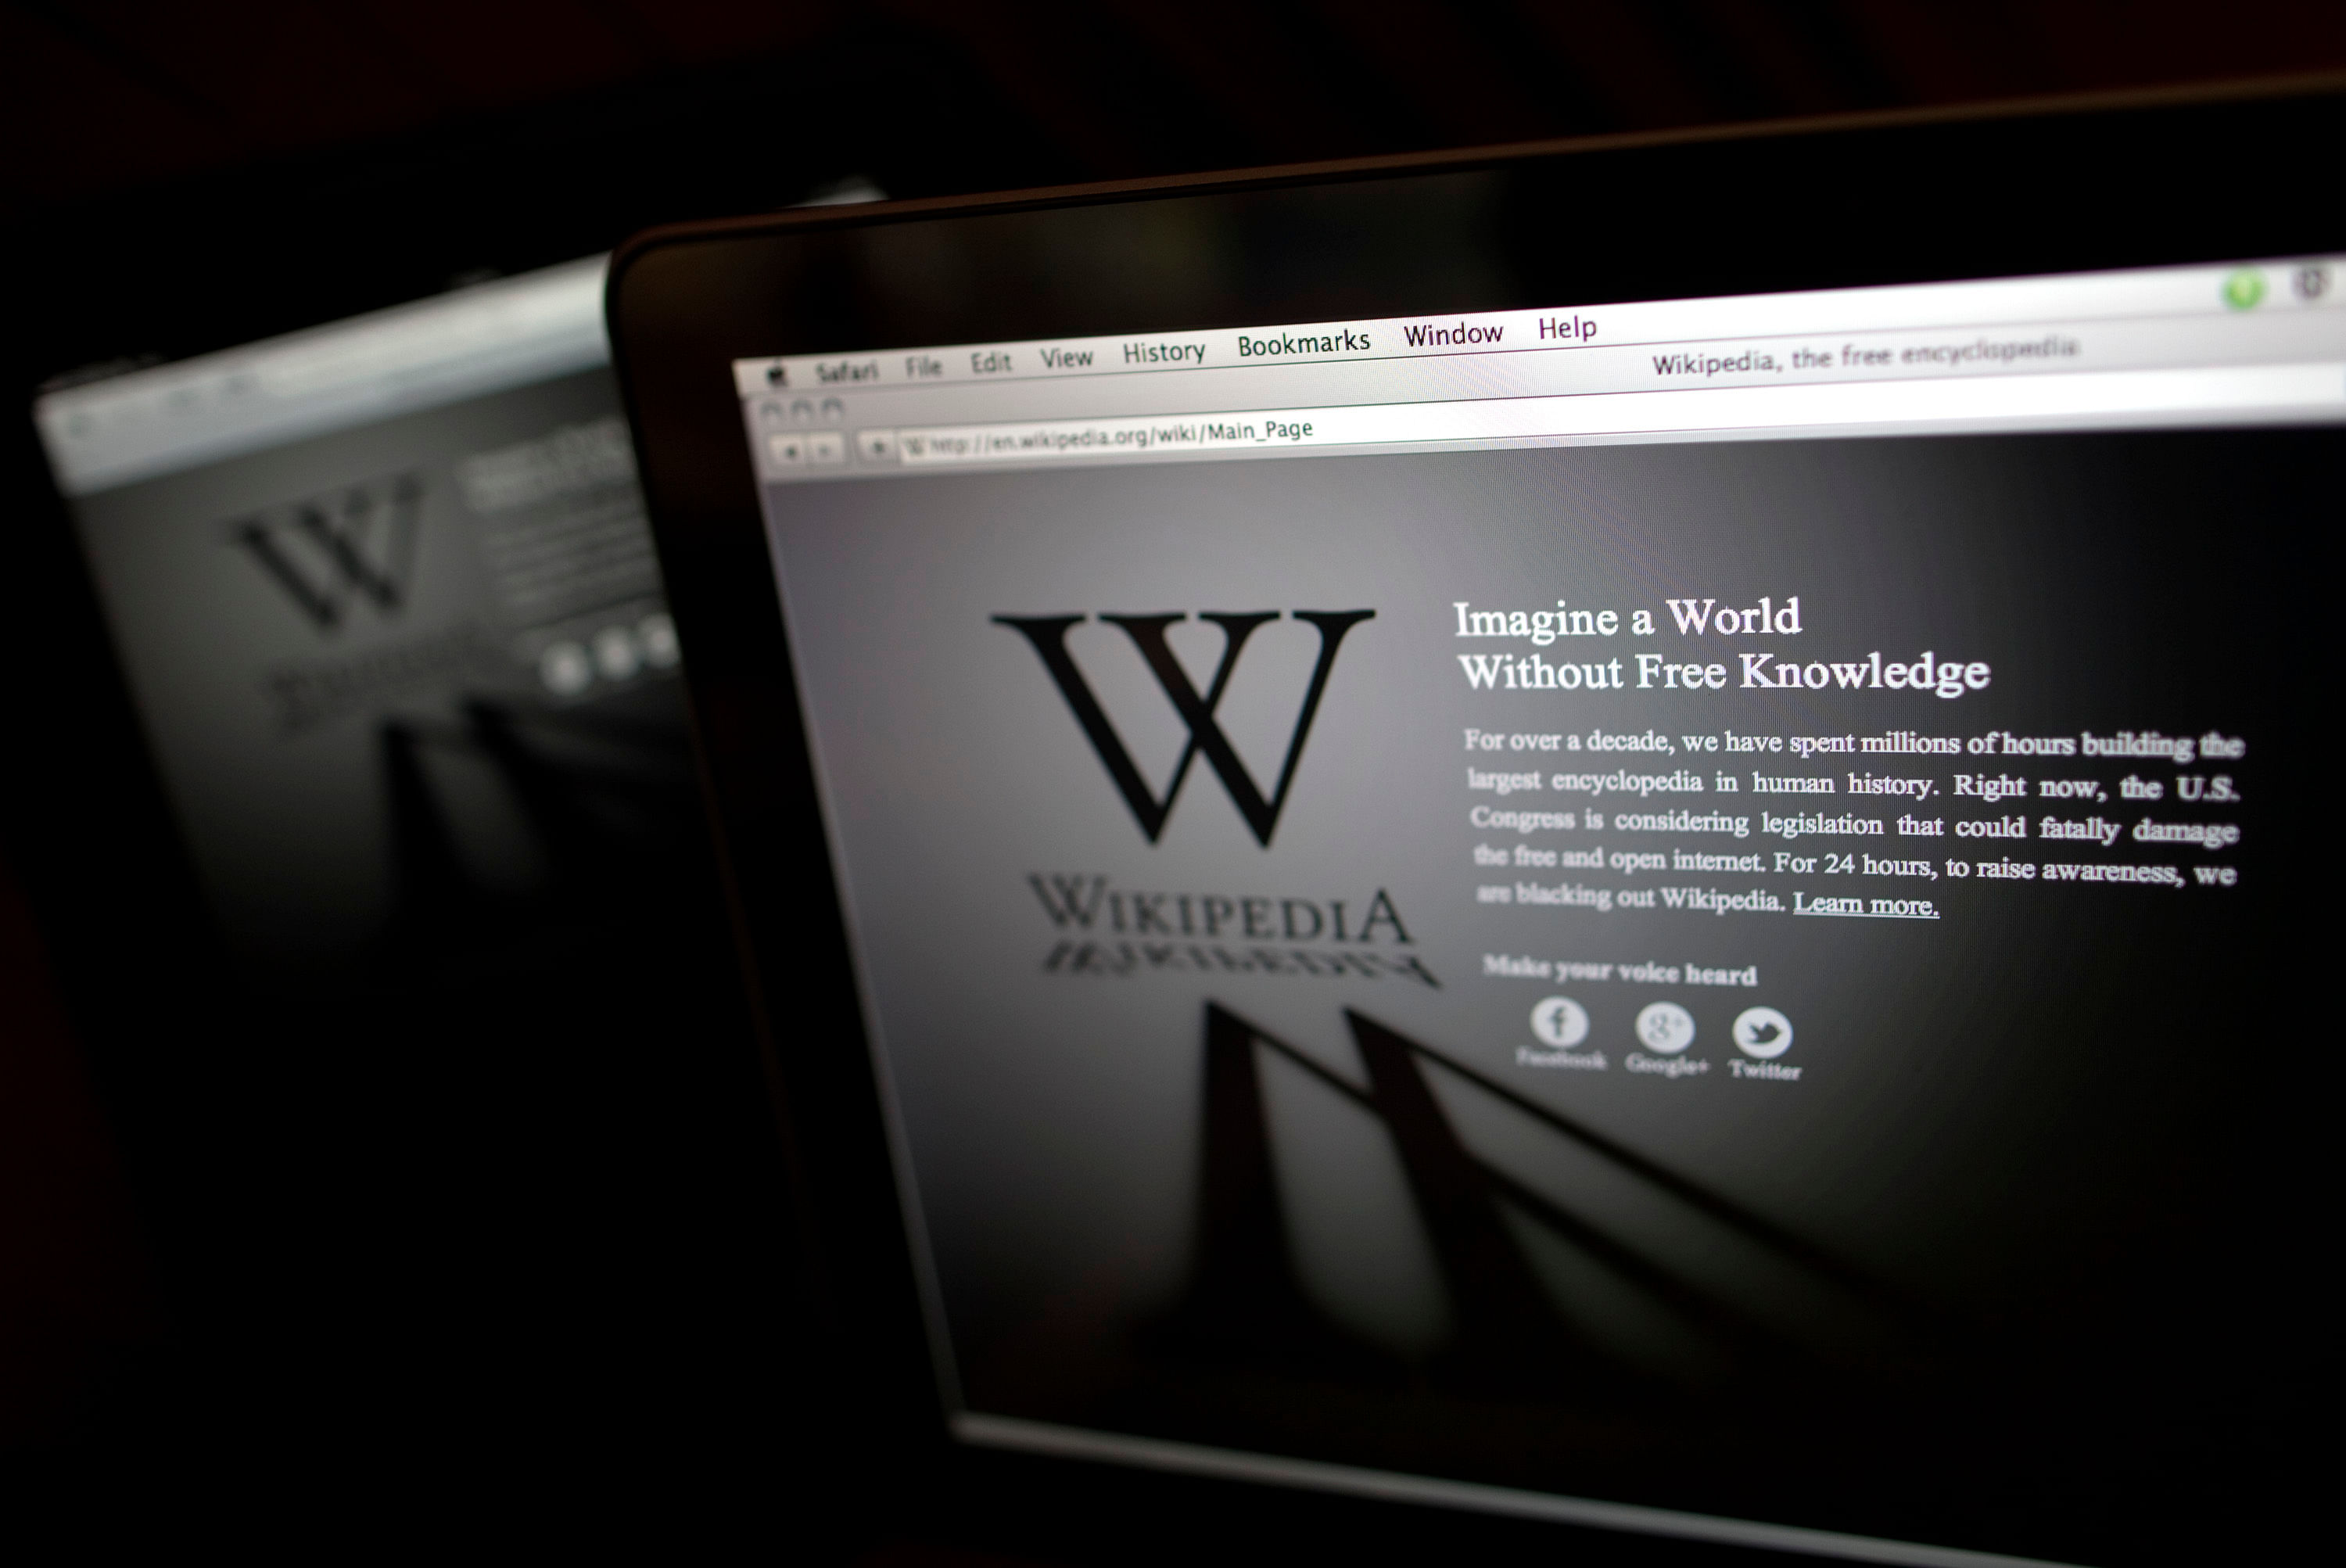 What Do Bankers Do Online? Edit Wikipedia - WSJ